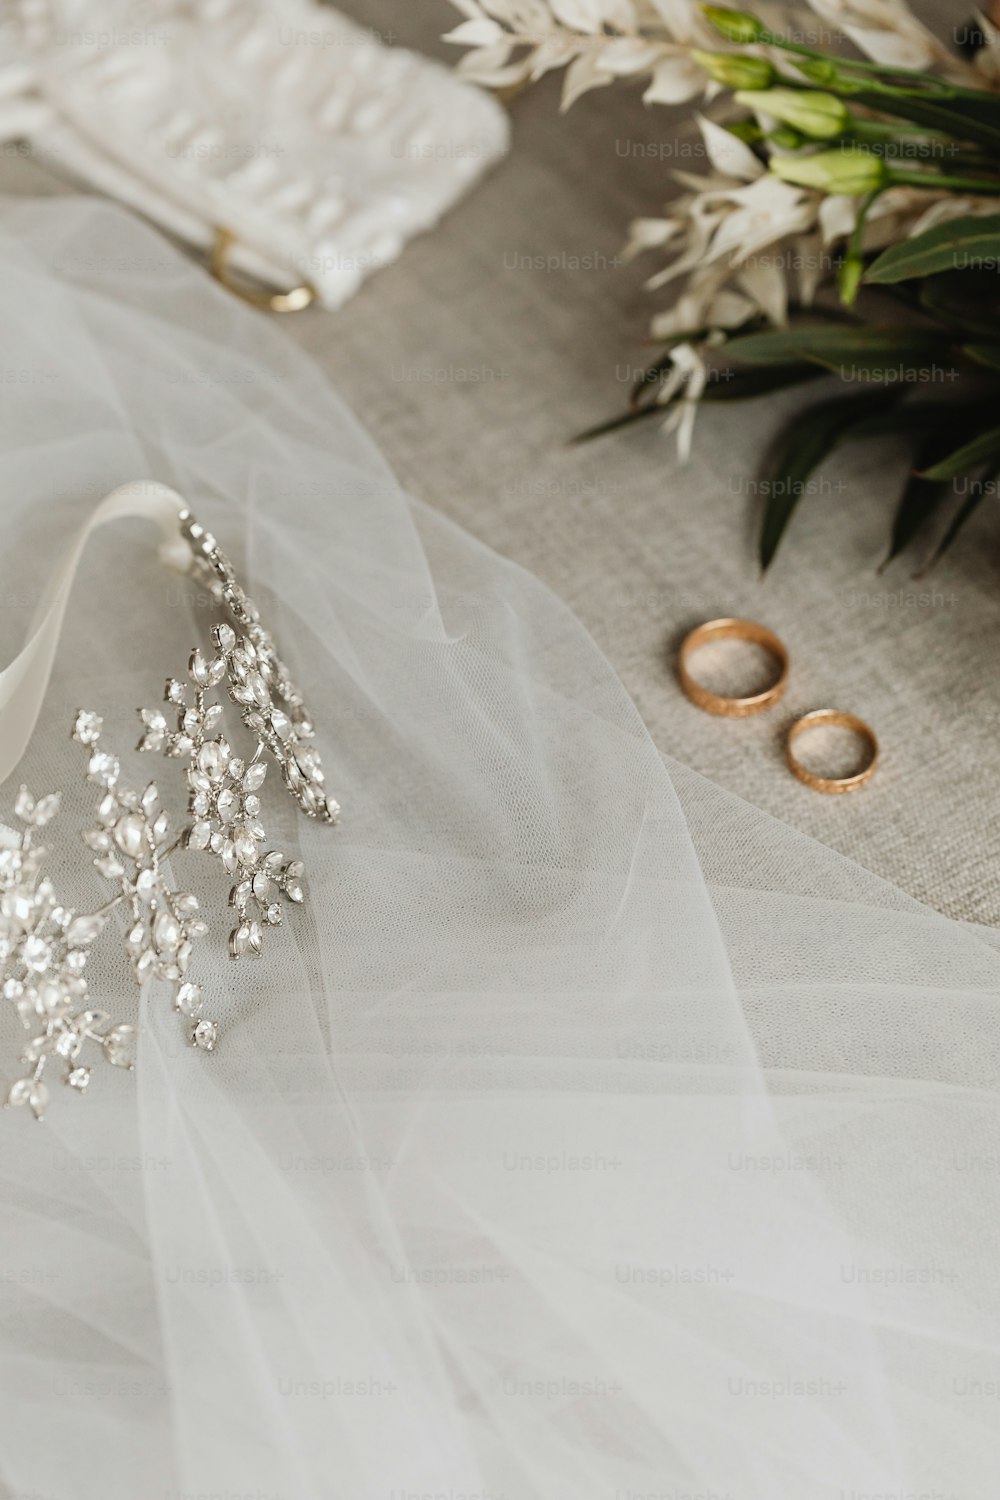 a wedding dress and two wedding rings on a table